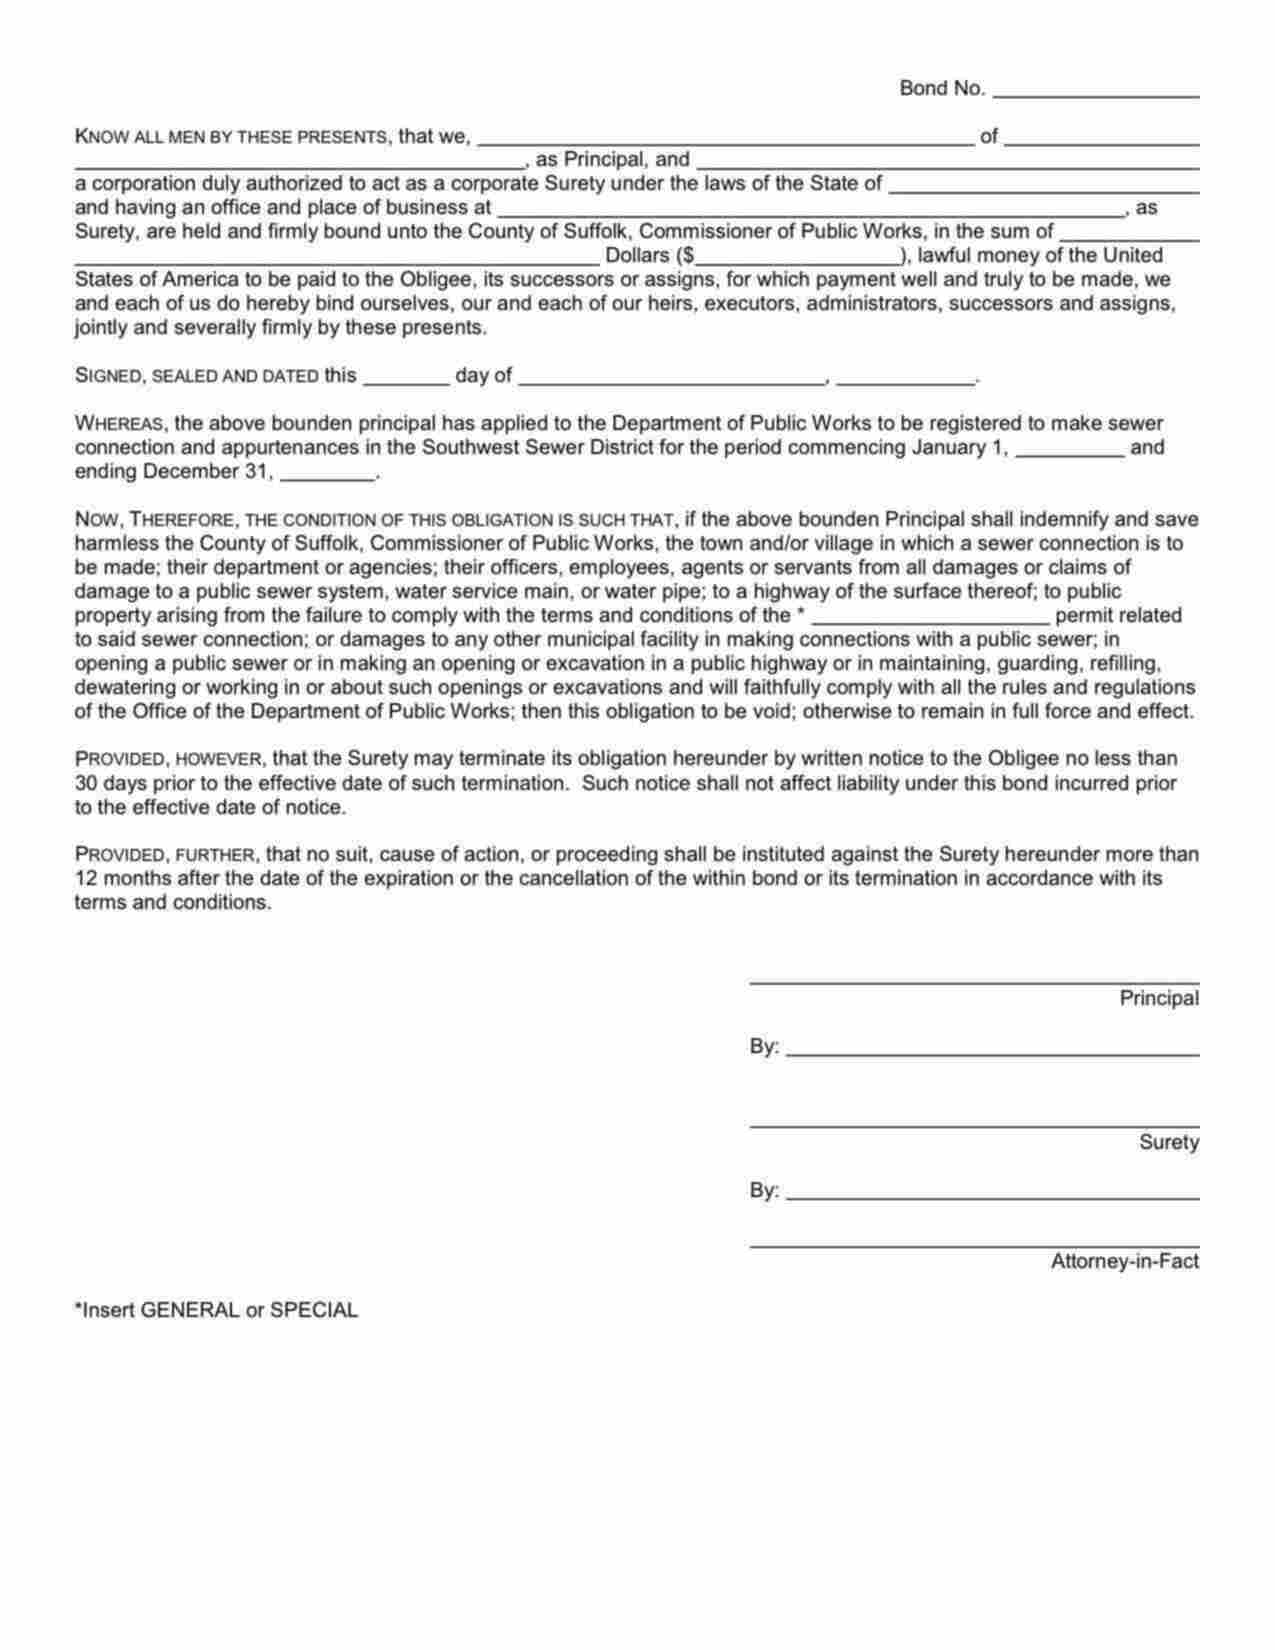 New York Sewer Connection - Special Permit Bond Form